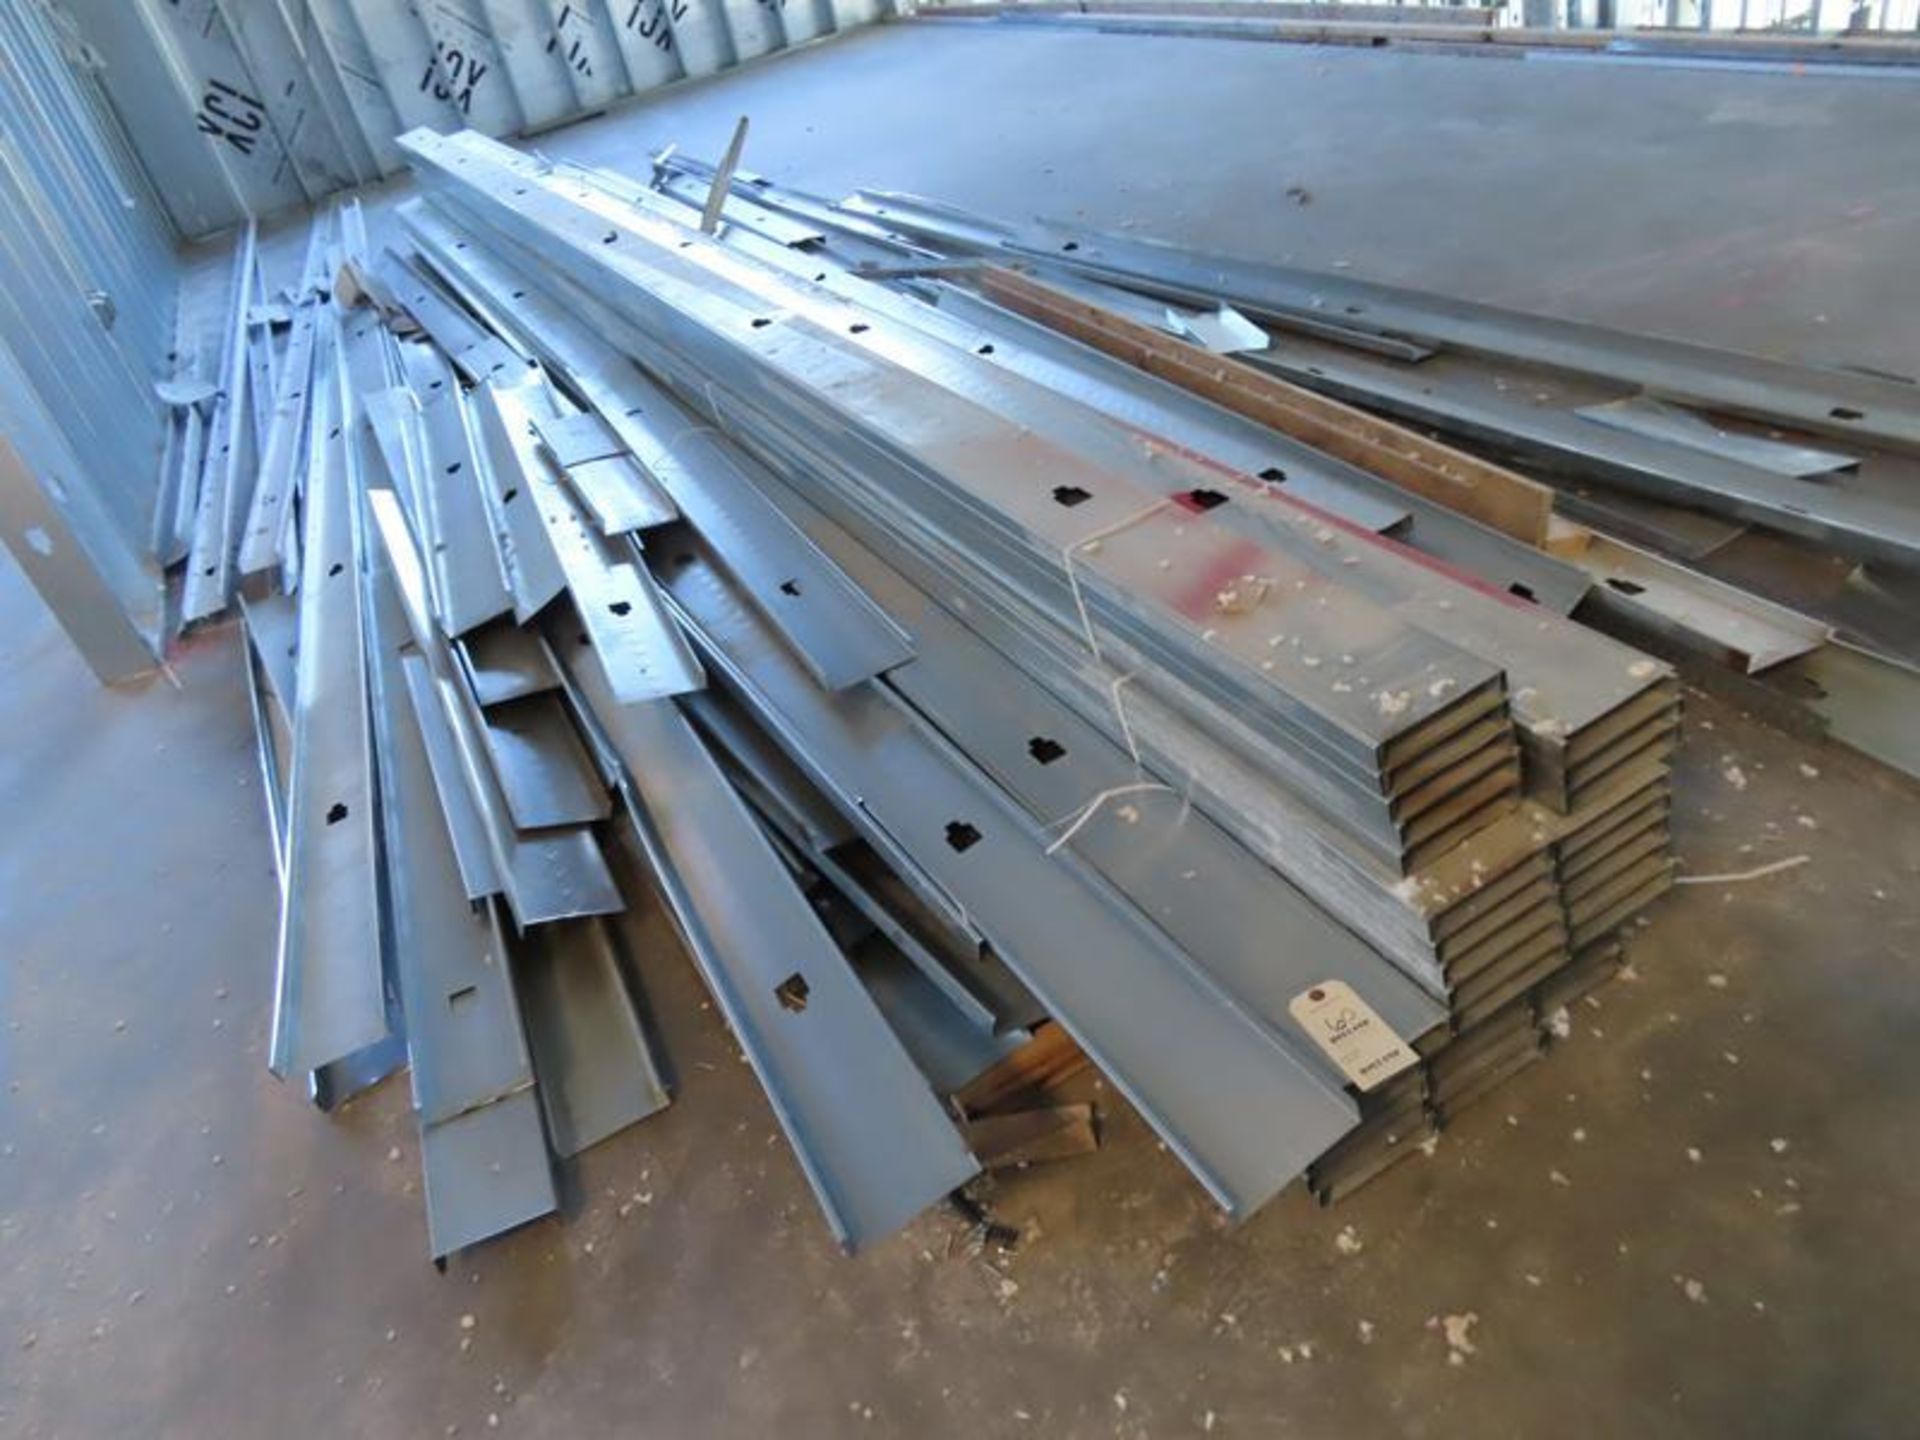 3 LARGE STACKS OF STEEL STUDS, PROSTUD 20Ga 6" 1-1/4" G40 NS (ALL UPSTAIRS) - Image 5 of 10